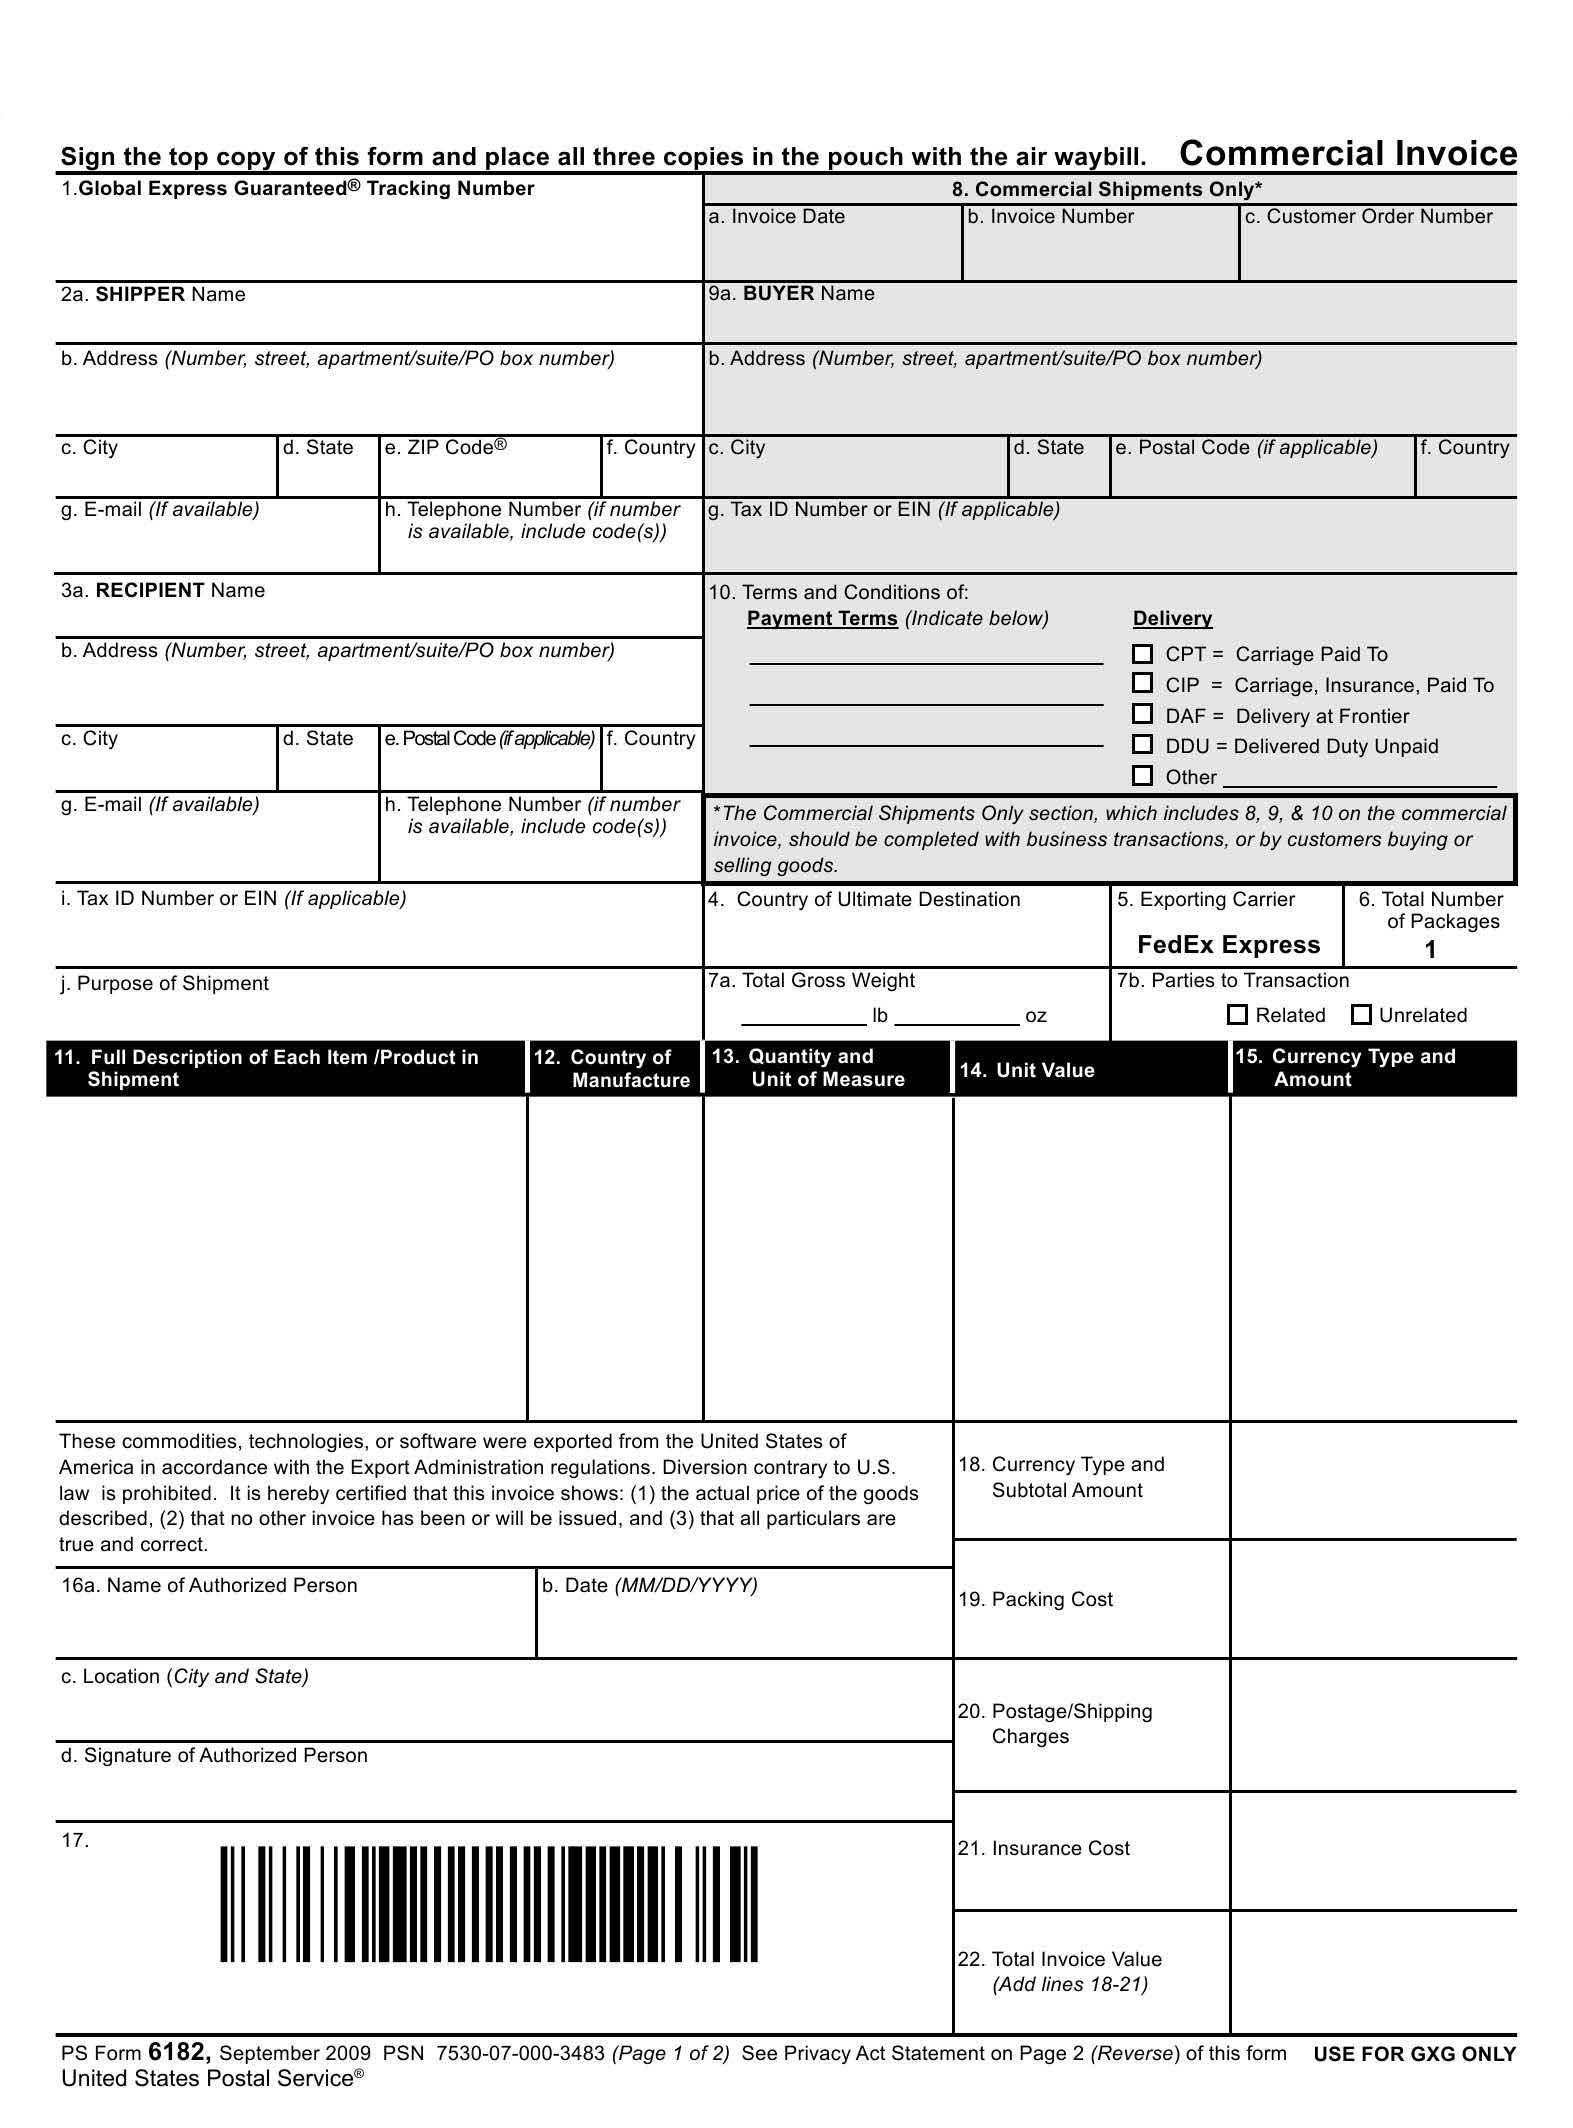 us customs invoice requirements commercial invoice 1573 X 2128